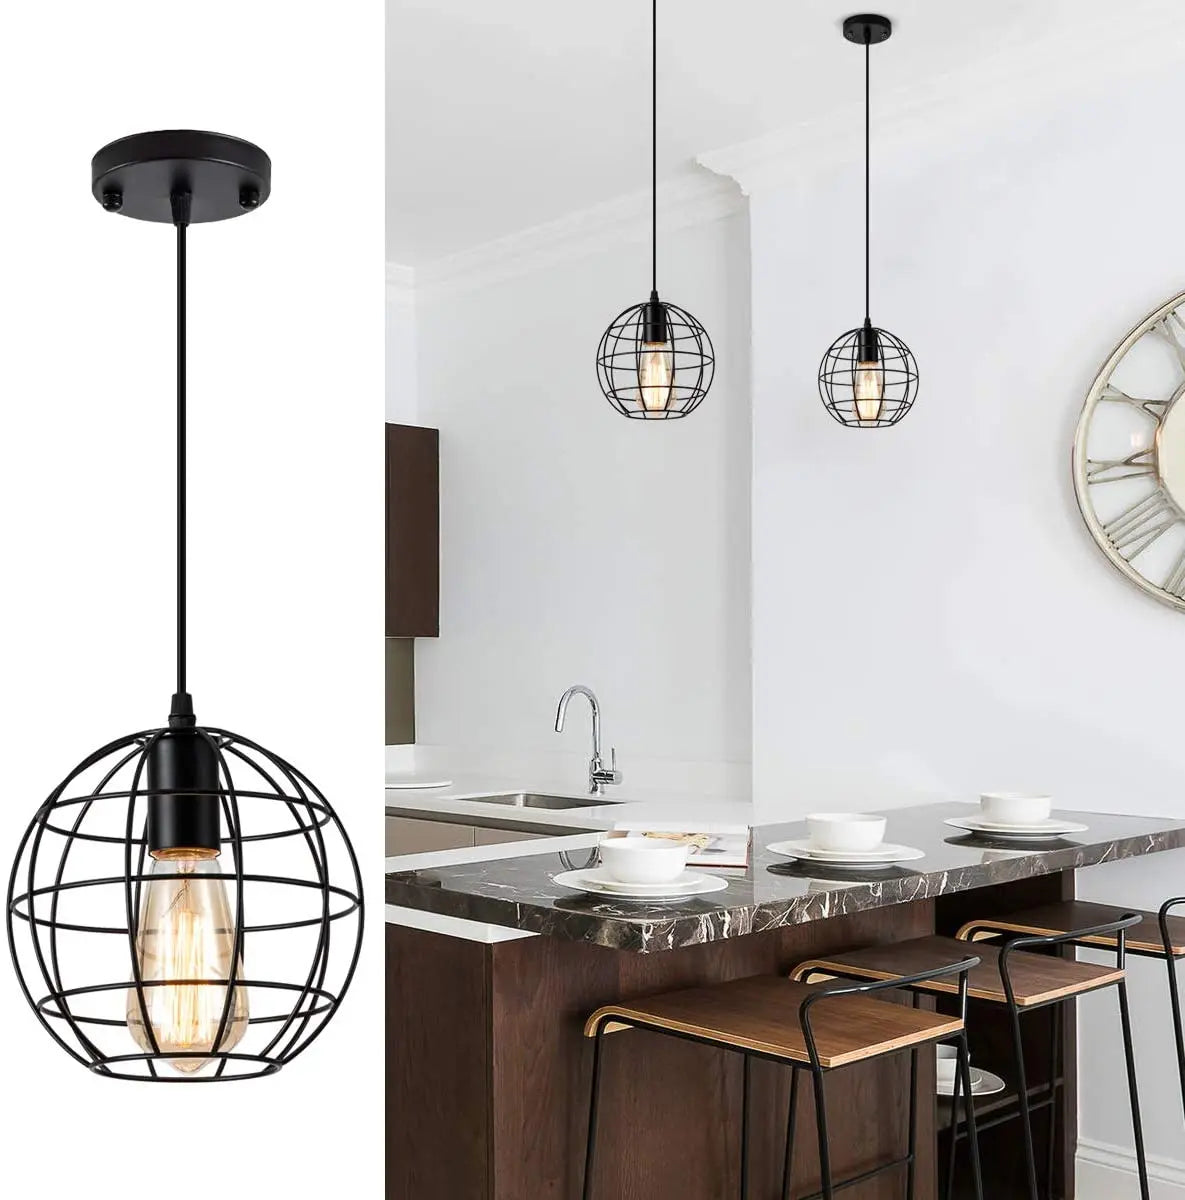 Retro Industrial Cage Pendant Light: Cage Lamp Retro Industrial Lighting Fixtures Kitchen Vintage Adjustable Hanging Lamps